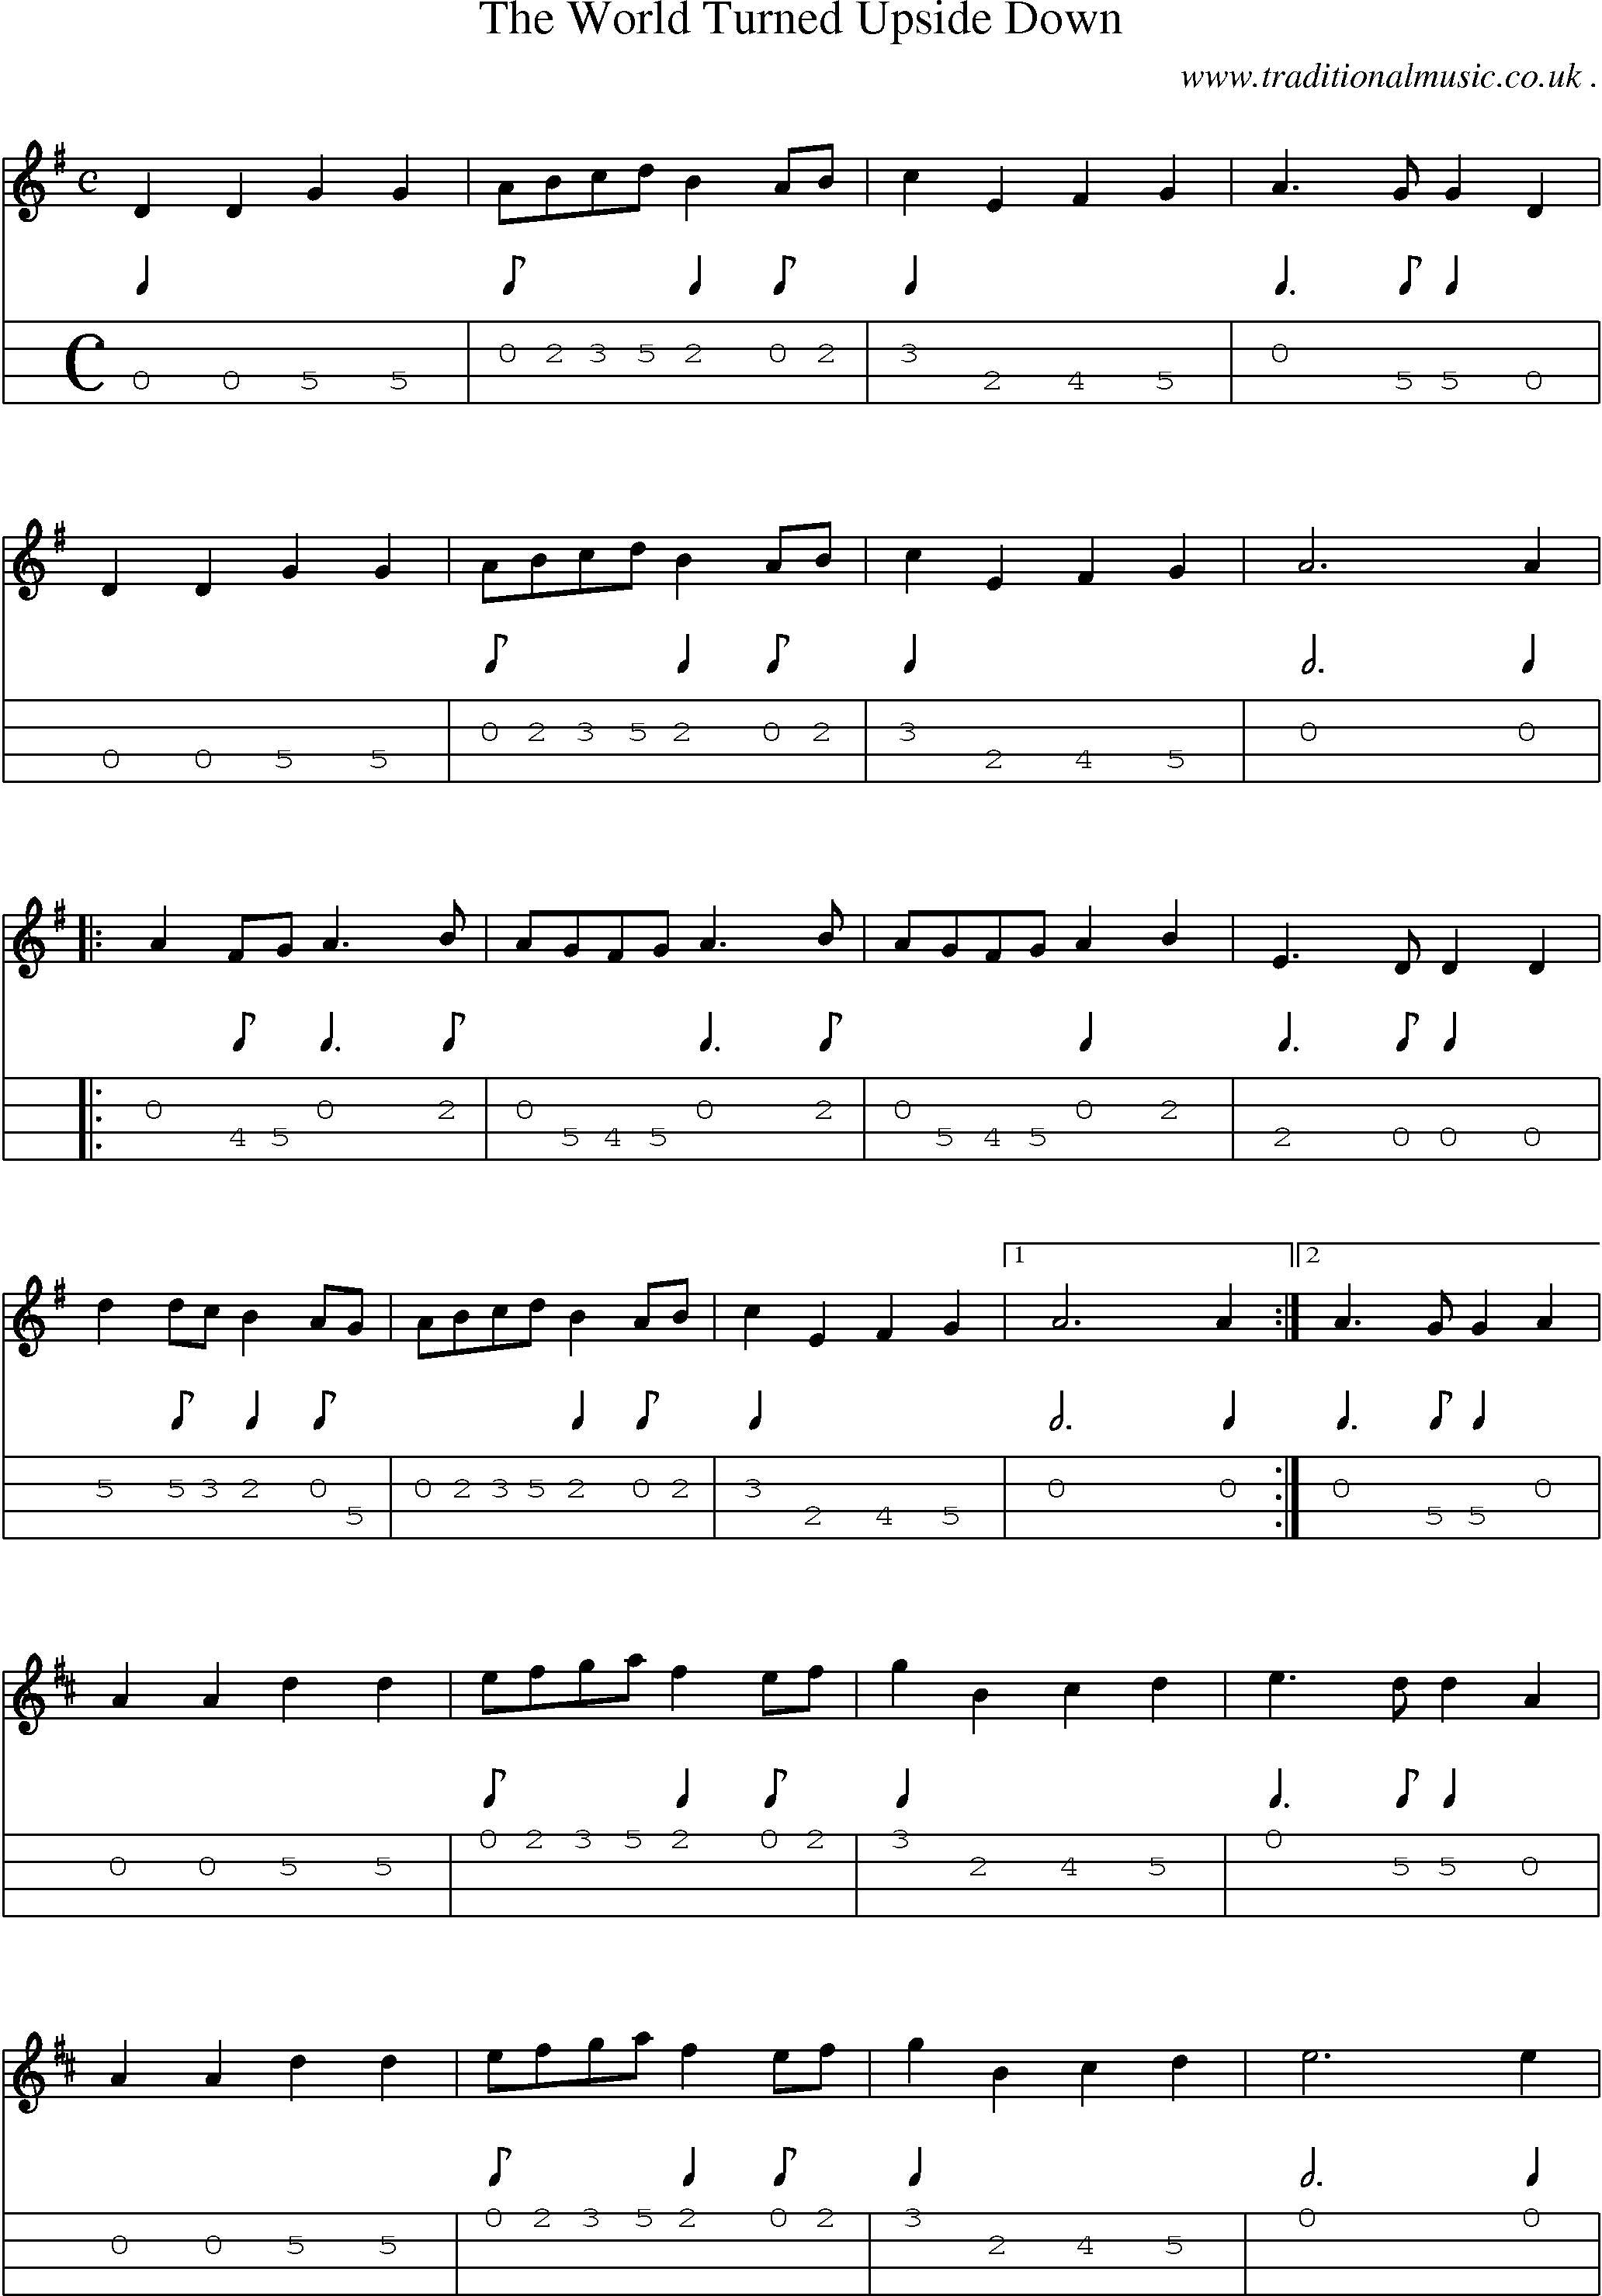 Sheet-Music and Mandolin Tabs for The World Turned Upside Down